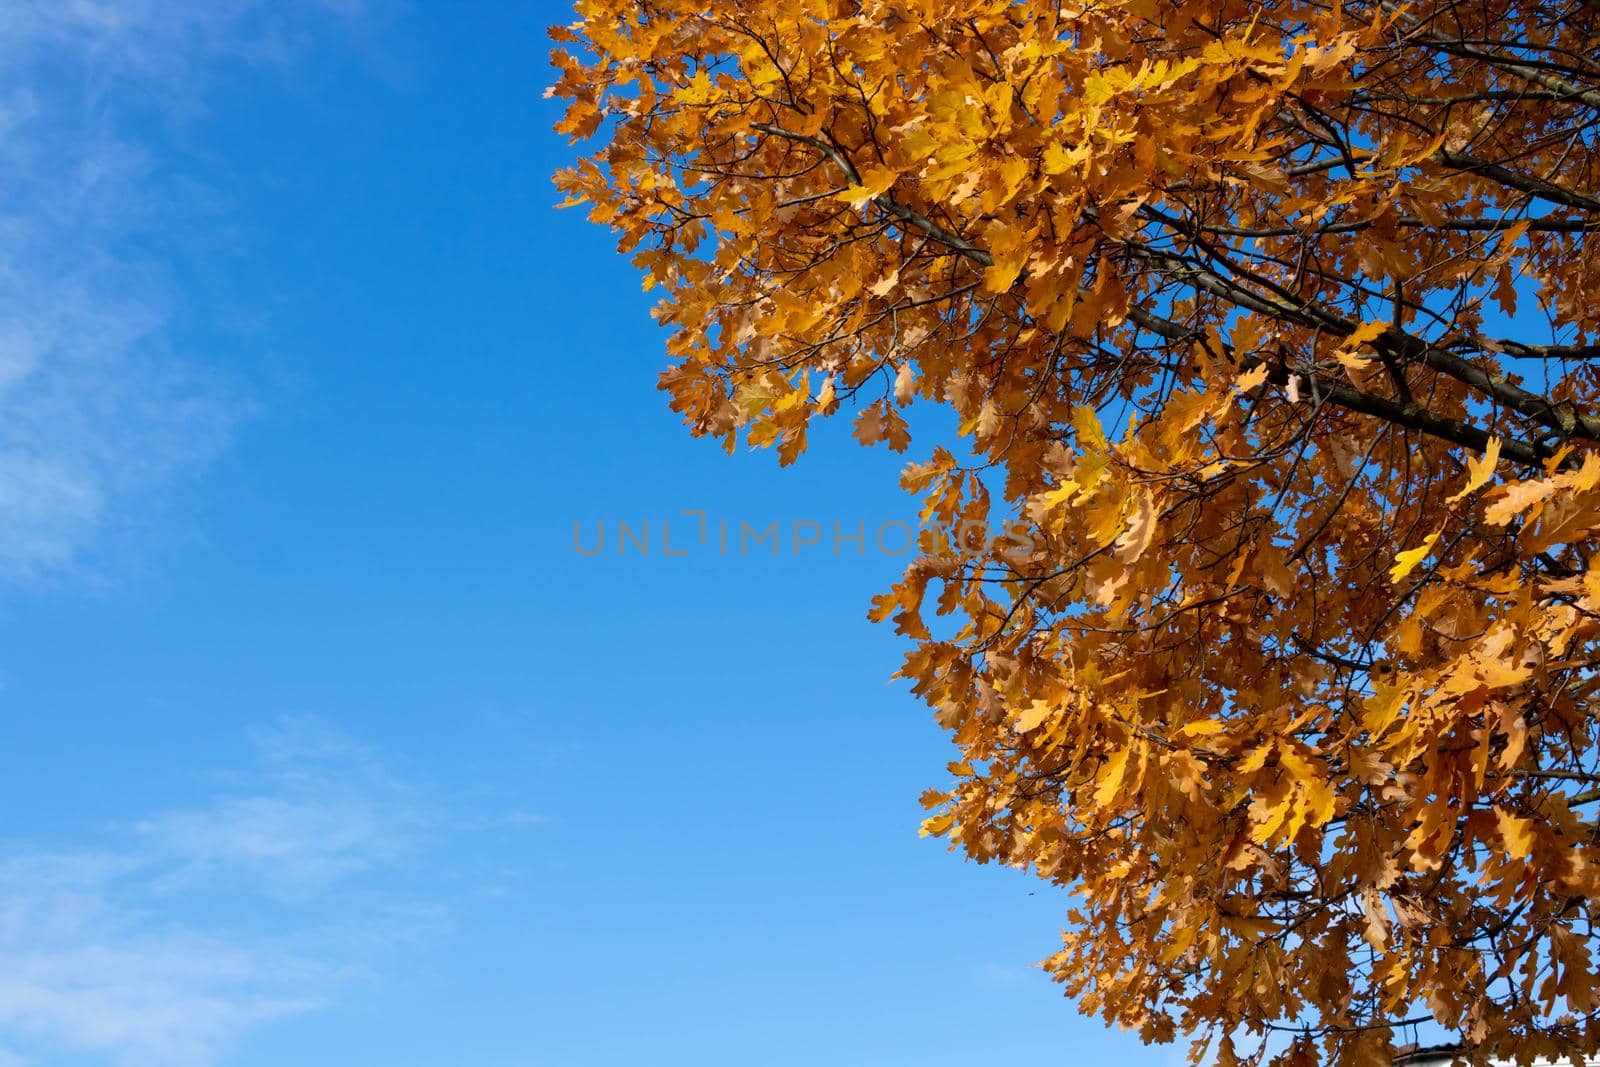 Autumn leaves with the blue sky background.